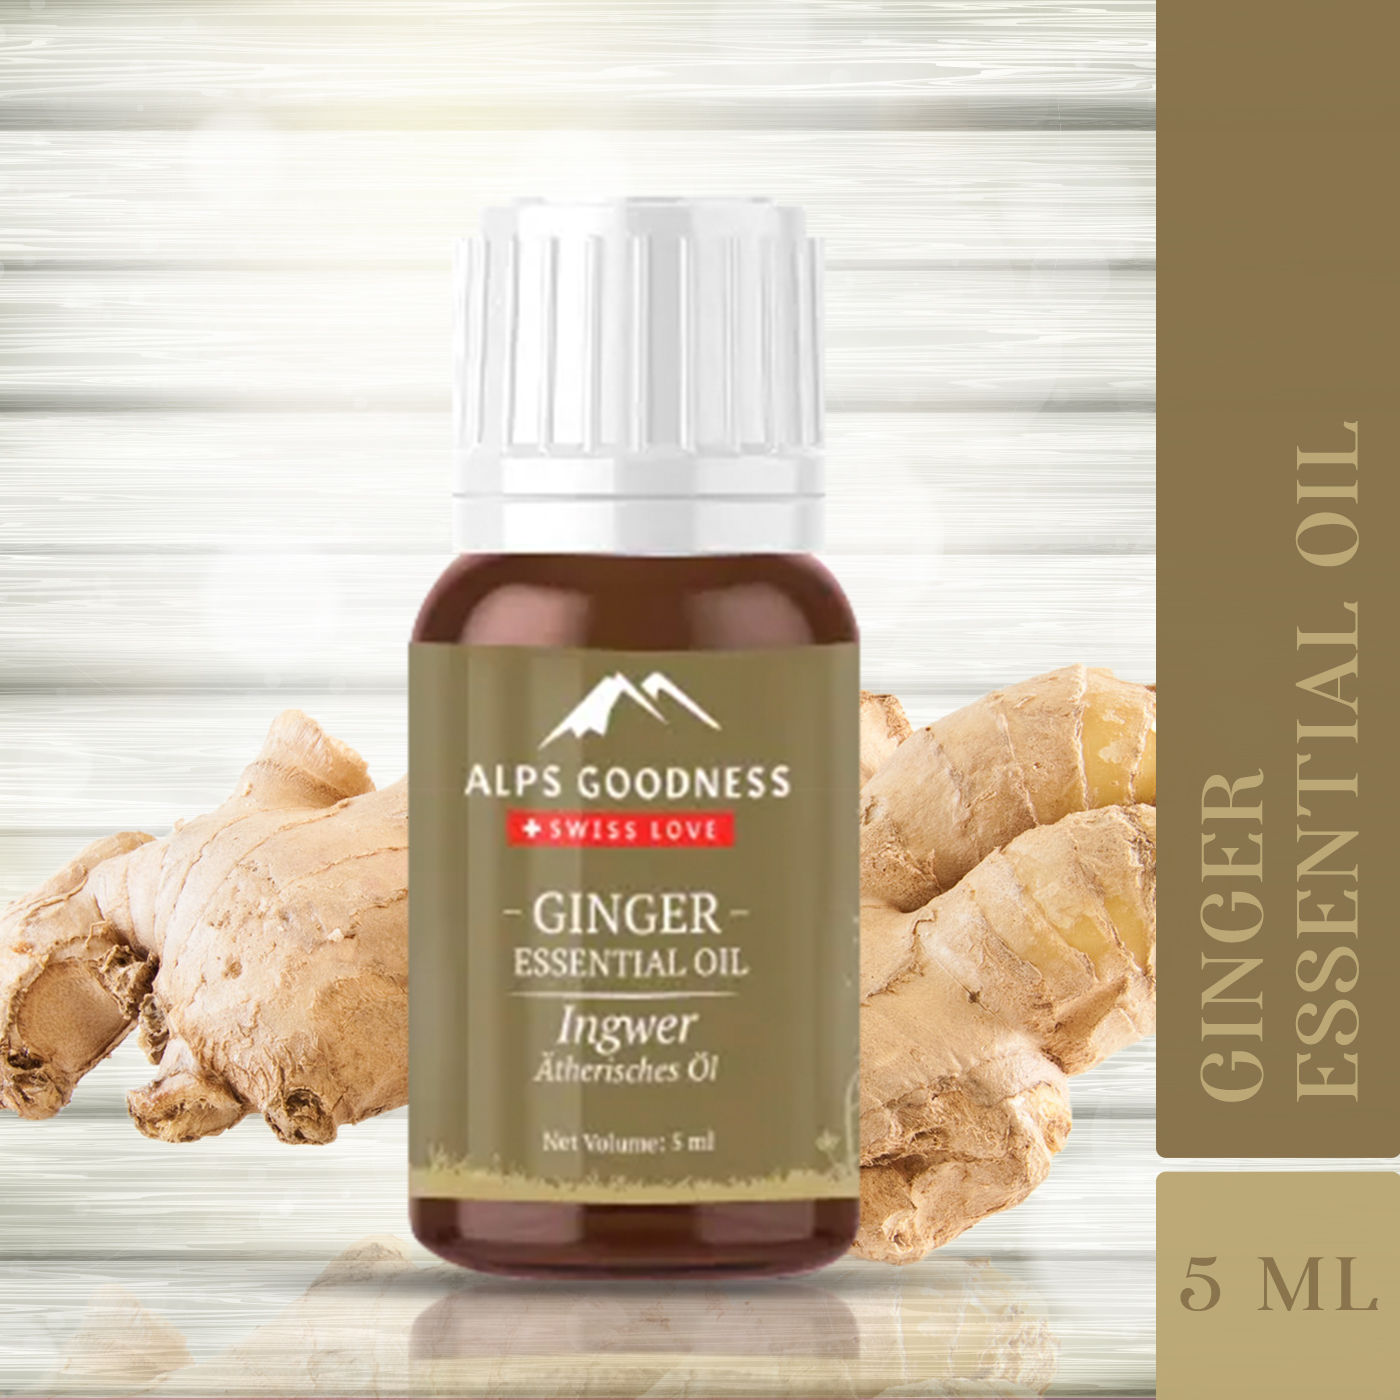 Buy Alps Goodness Essential Oil - Ginger (5 ml) - Purplle